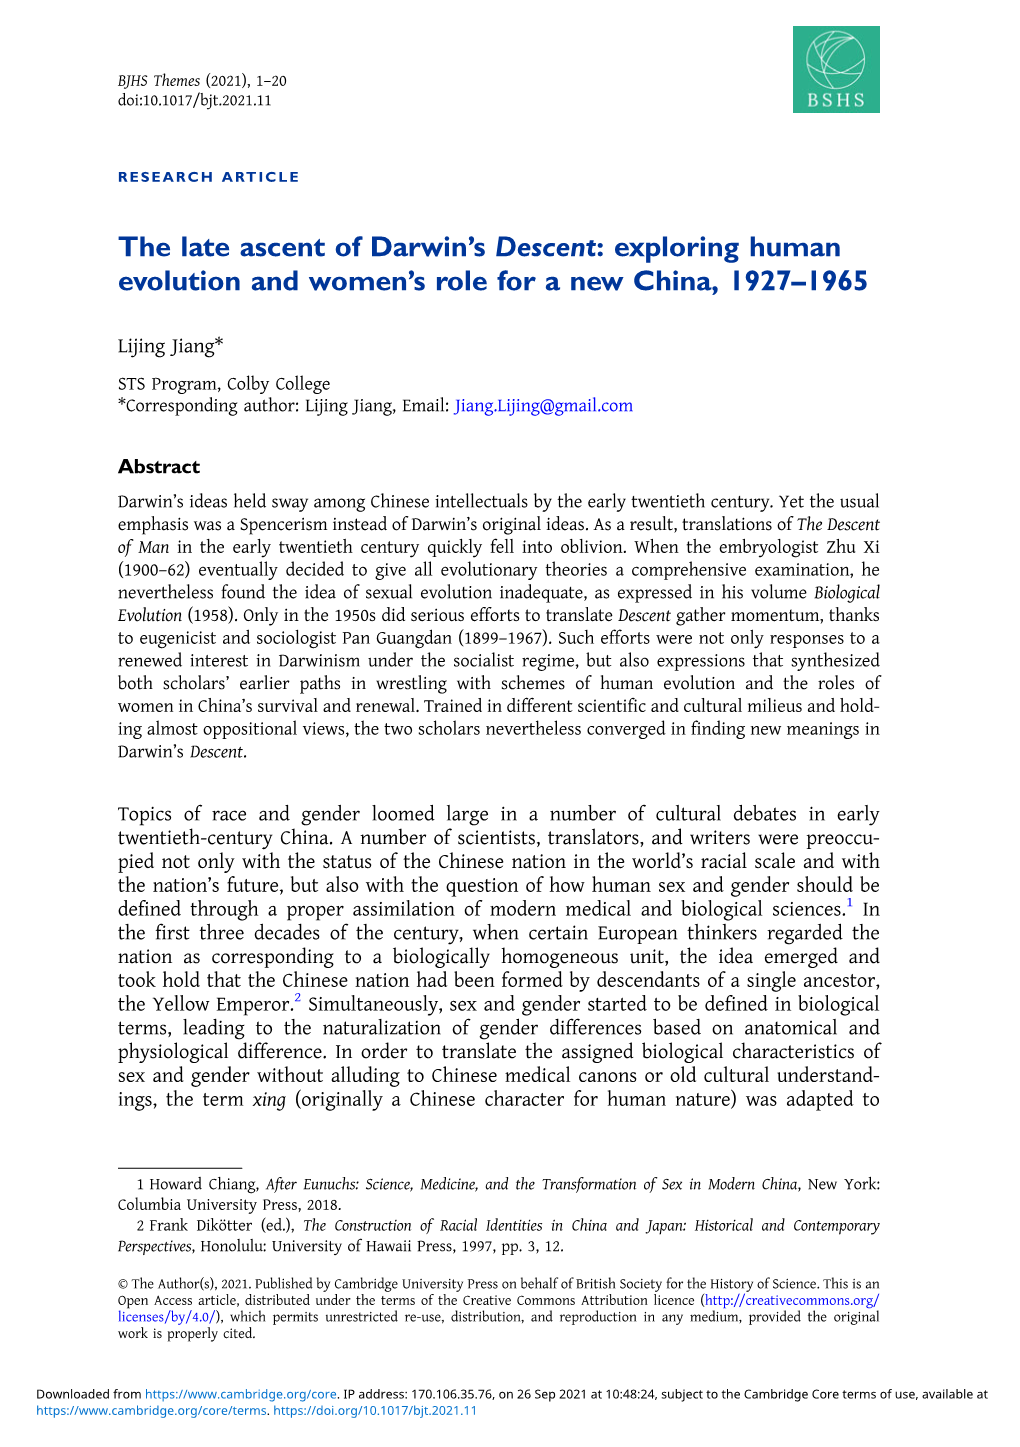 The Late Ascent of Darwin's Descent: Exploring Human Evolution And